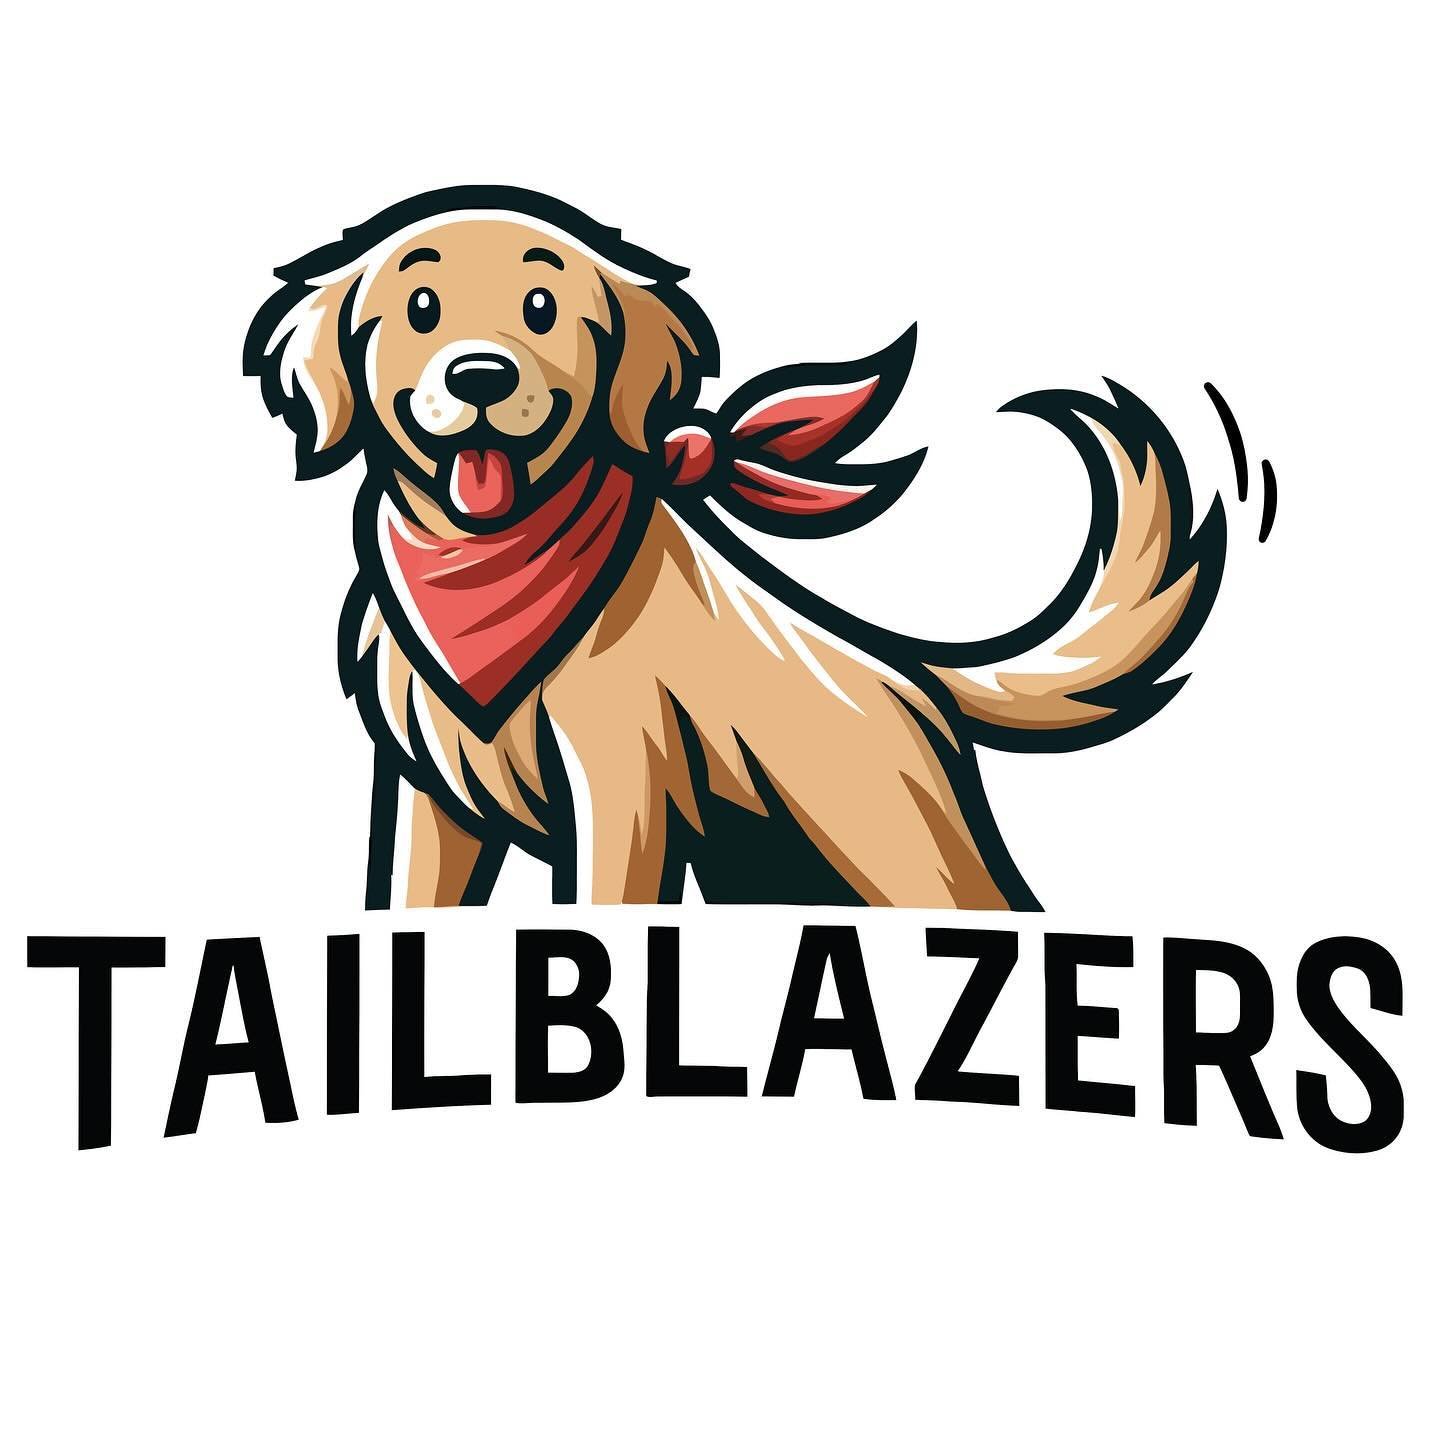 😊 Exciting news !!&nbsp;&nbsp;

I&rsquo;m thrilled to share that I am back doing what I love - walking dogs and caring for your pets! 🐕🐰🐹🐾

📍Tails on Trails has rebranded to Tailblazers and is now based in Christchurch, New Zealand. 

I can&rsq